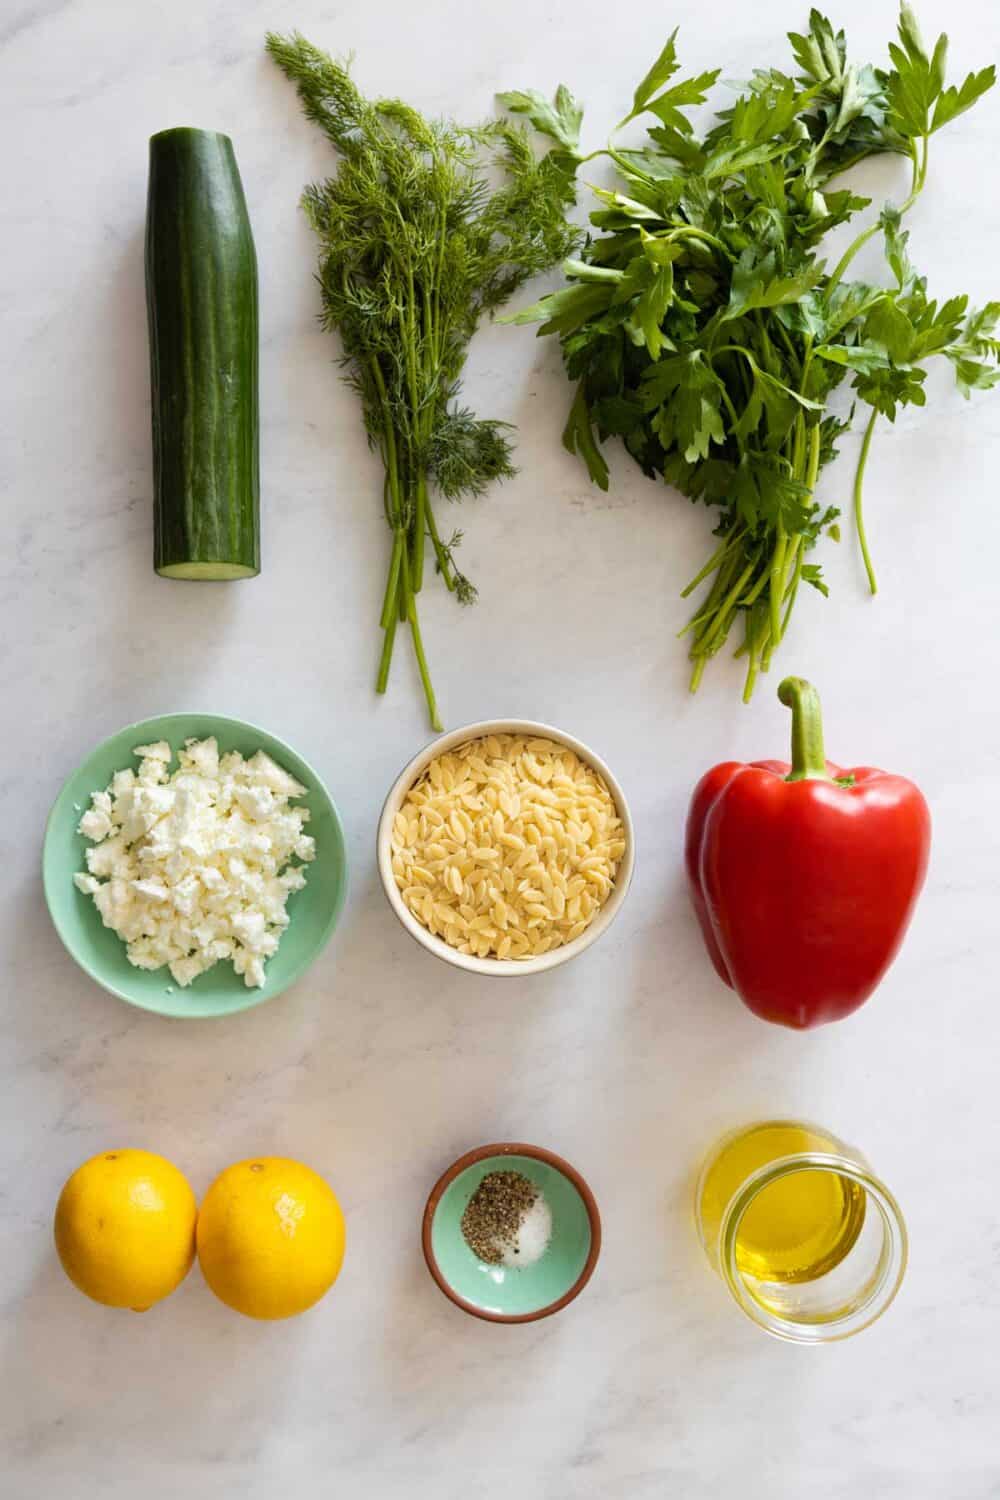 9 Ingredients for Orzo Salad laid out on a kitchen counter.